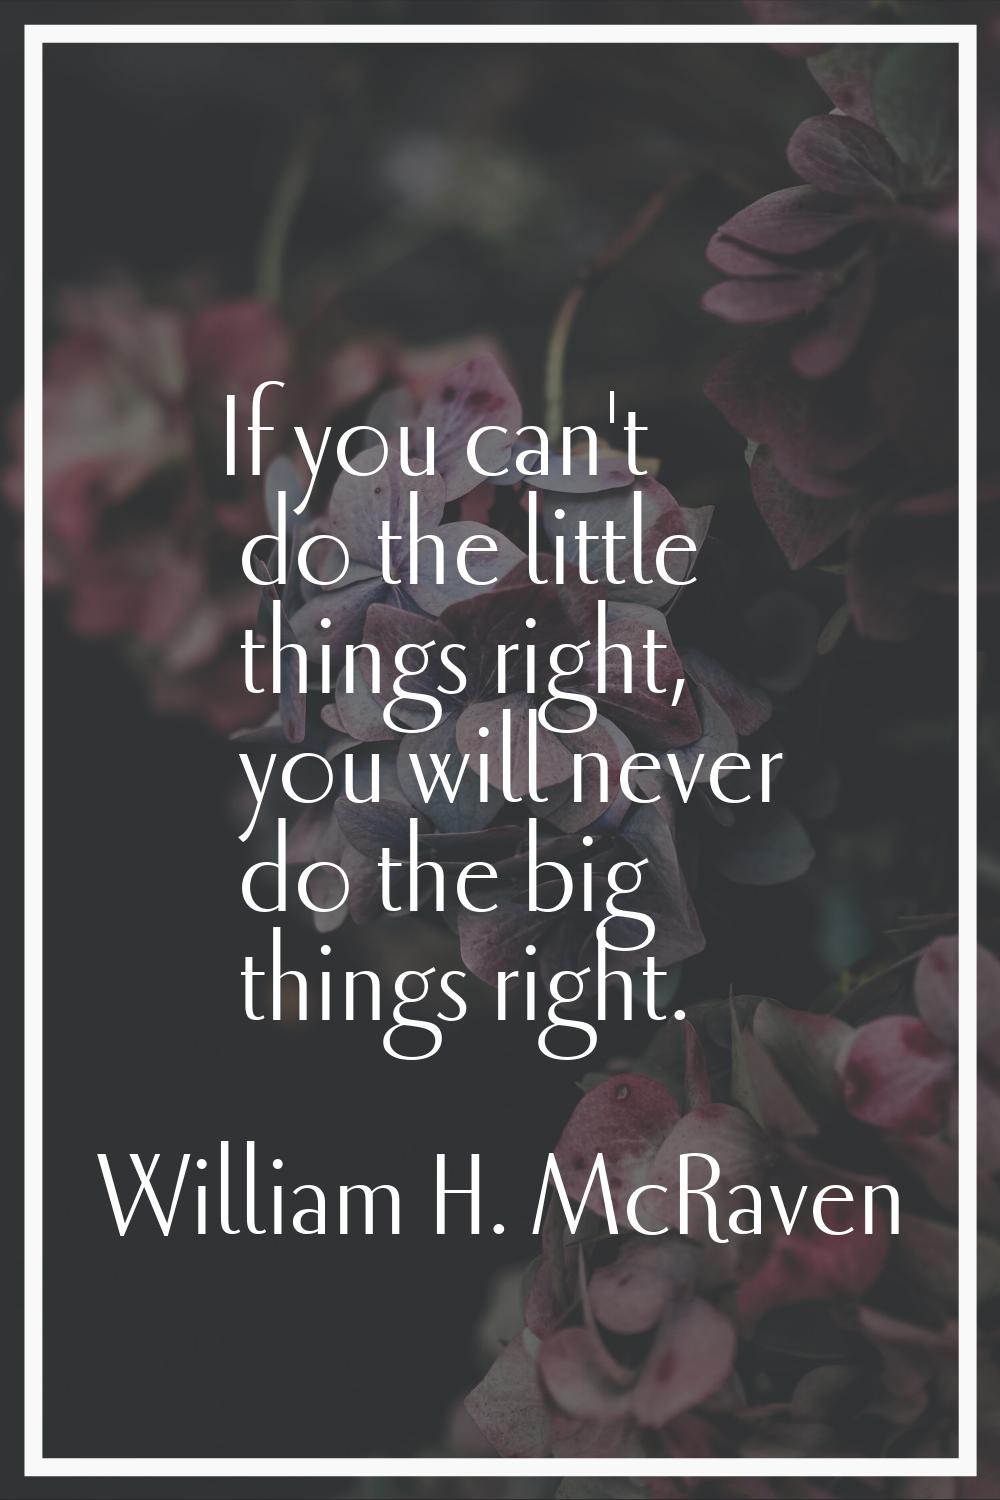 If you can't do the little things right, you will never do the big things right.